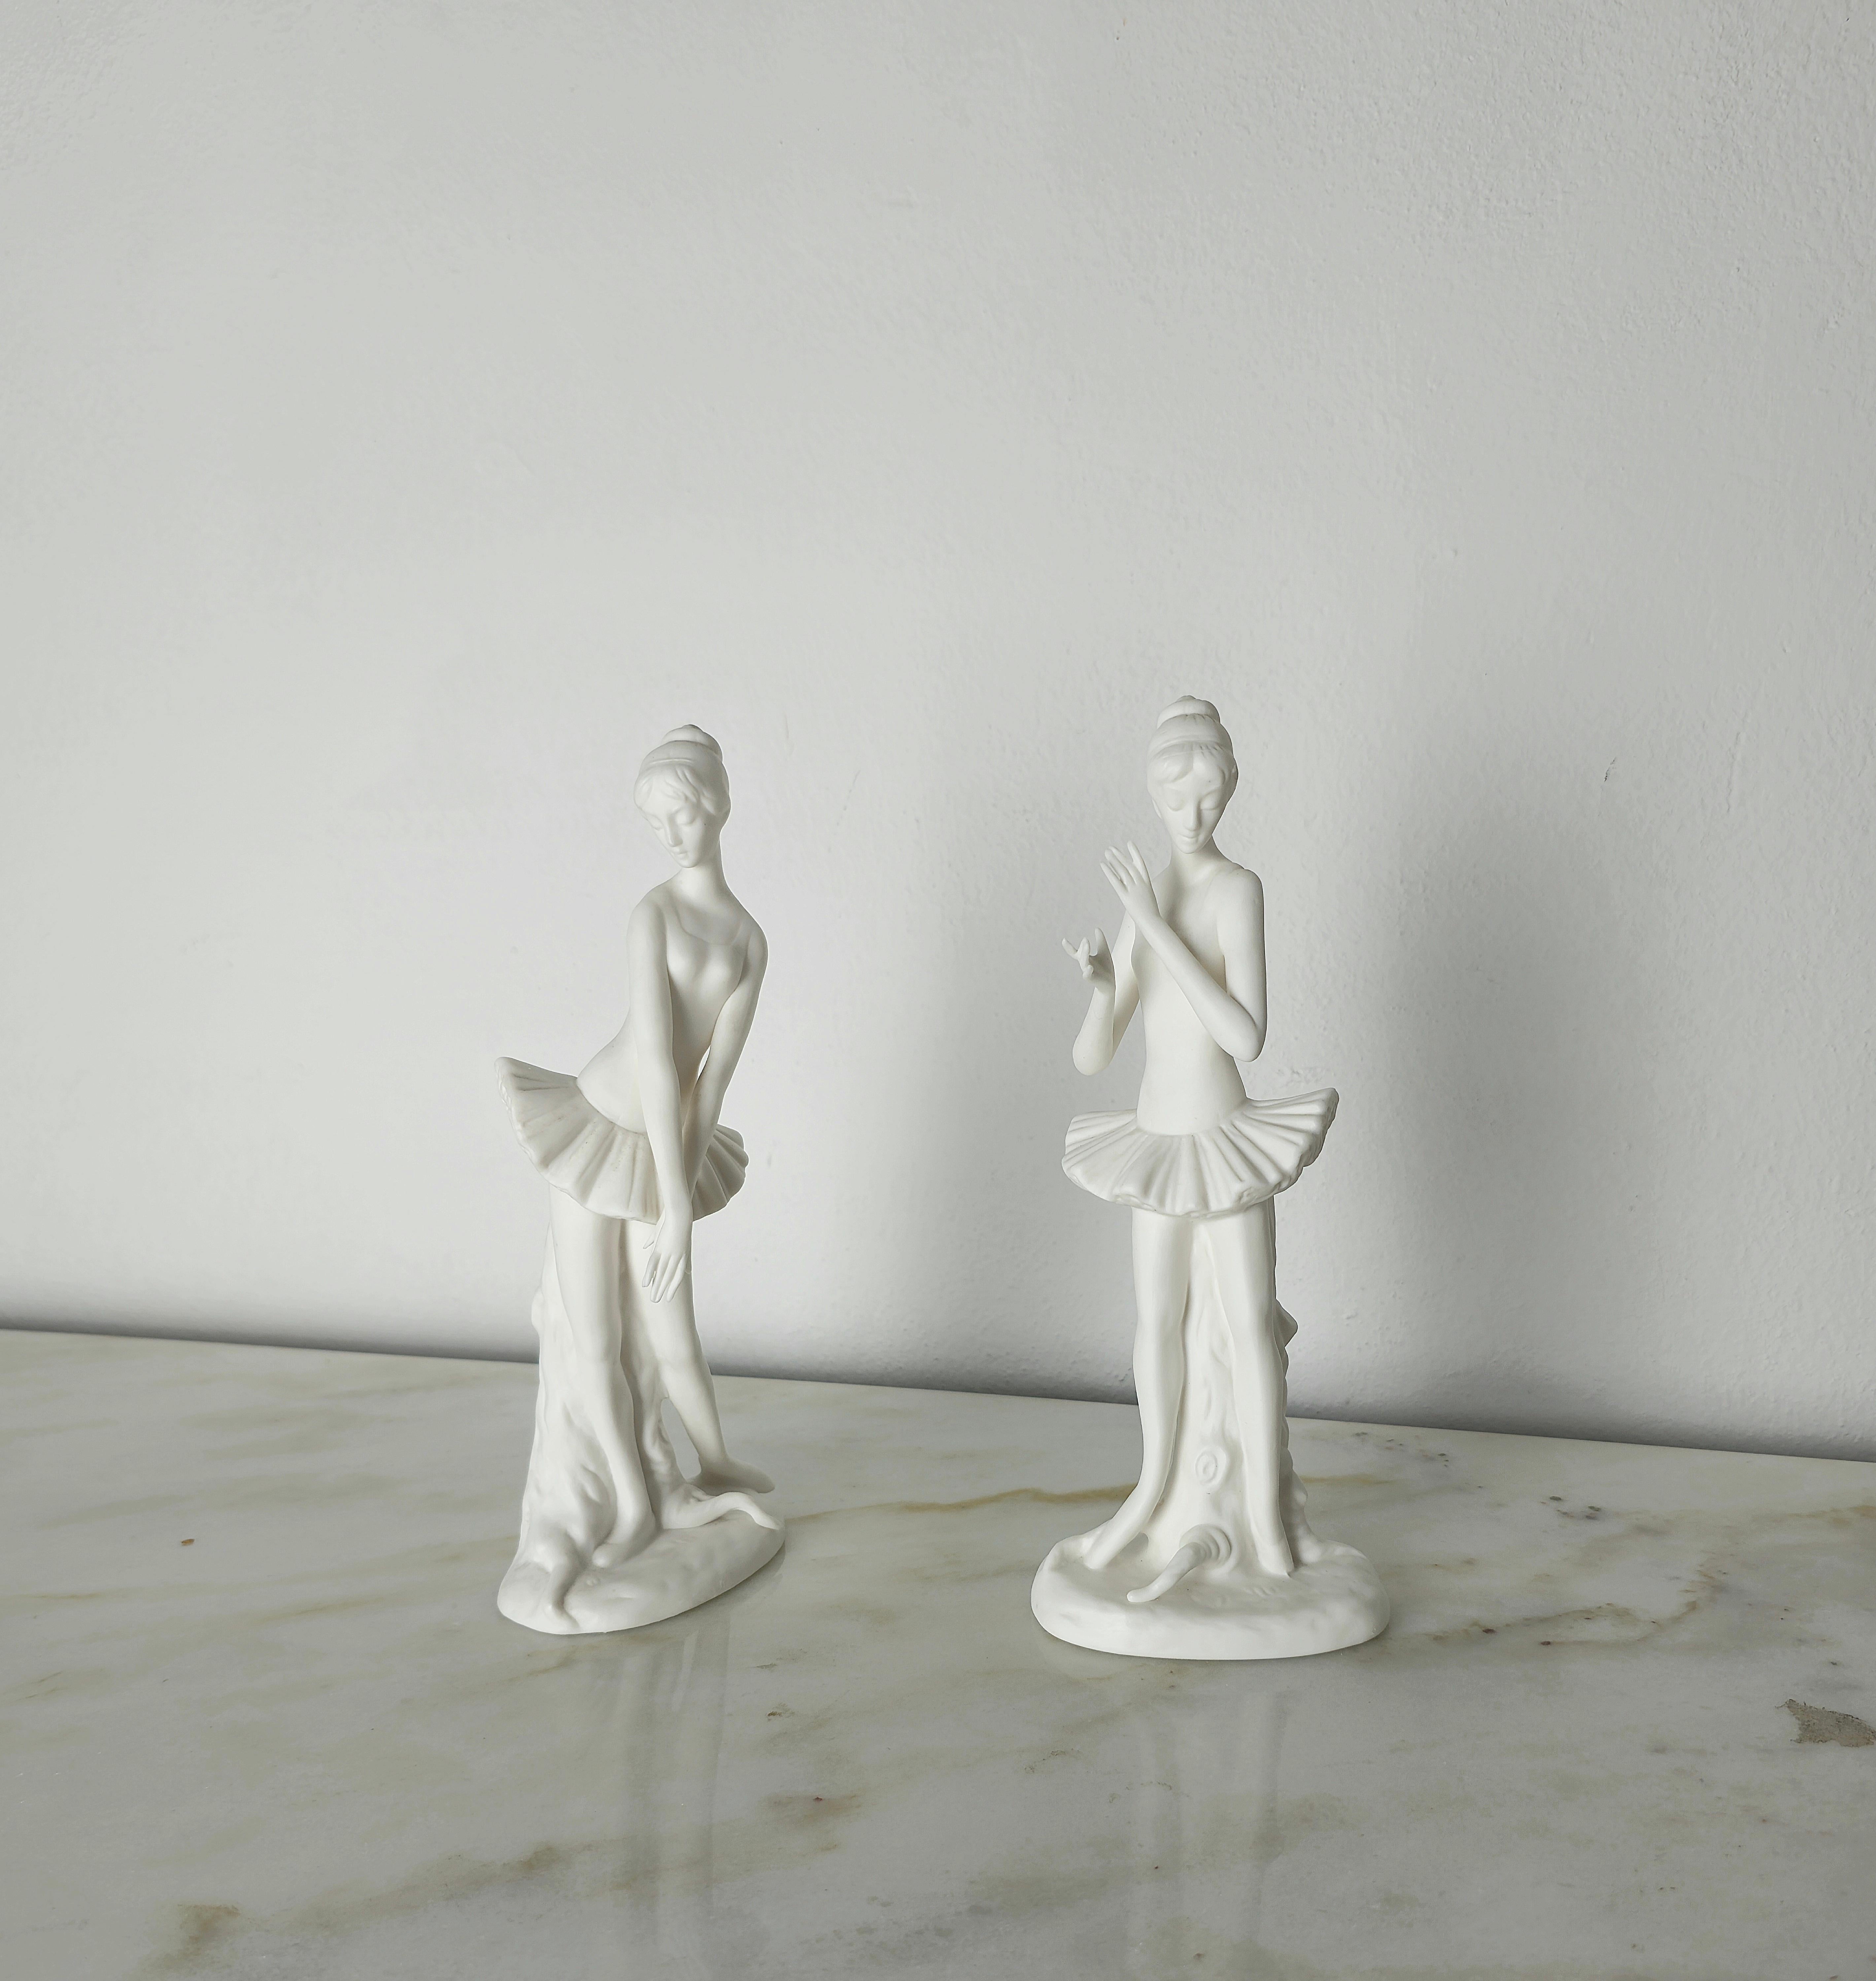 20th Century Sculptures Decorative Objects Porcelain Biscuit Midcentury Italy 1950s Set of 2 For Sale